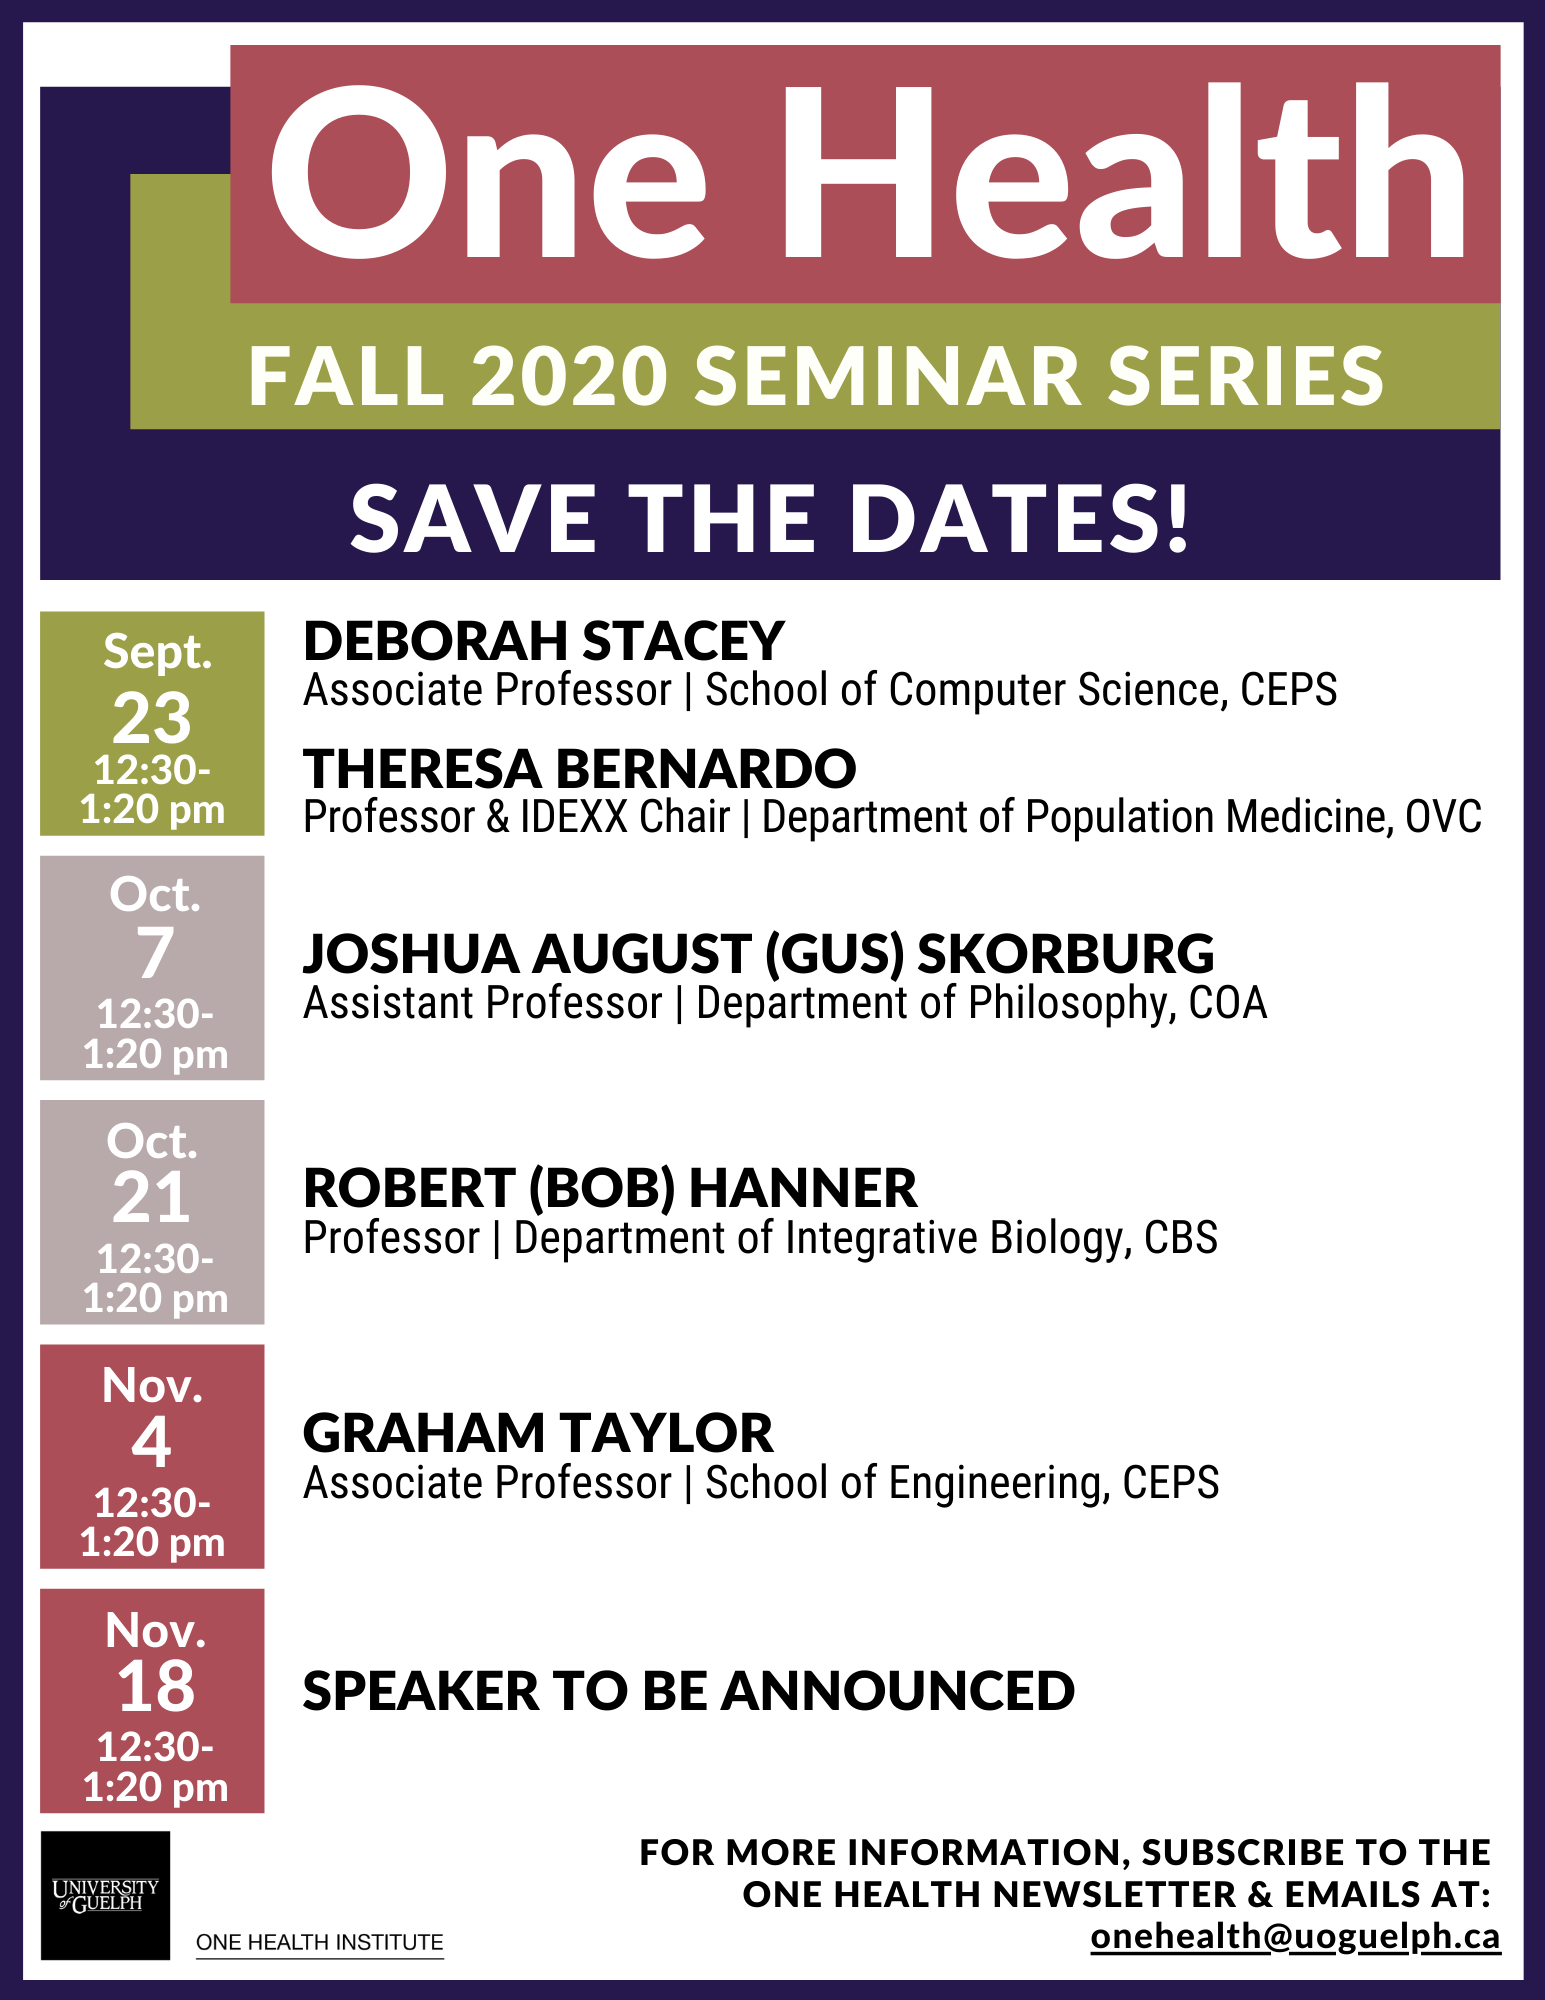 Poster announcing One Health Fall 2020 Seminar Series Save the Dates! Sept. 23 12:30-1:20pm Deborah Stacey (Associate Professor, School of Computer Science, CEPS) Theresa Bernardo (Professor & IDEXX Chair, Department of Population Medicine, OVC). Oct 7 12:30-1:20pm Joshua August (Gus) Skorburg (Assistant Professor, Department of Philosophy, COA). Oct 21 12:30-1:20pm Robert (Bob) Hanner (Professor, Department of Integrative Biology, CBS). Nov. 4 12:30-12:20pm Graham Taylor (Associate Professor, School of Engineering, CEPS). Nov. 18 12:30-1:20pm Speaker to be announced. One Health Institute logo. For more information subscribe to the One Health newsletter & emails at: onehealth@uoguelph.ca